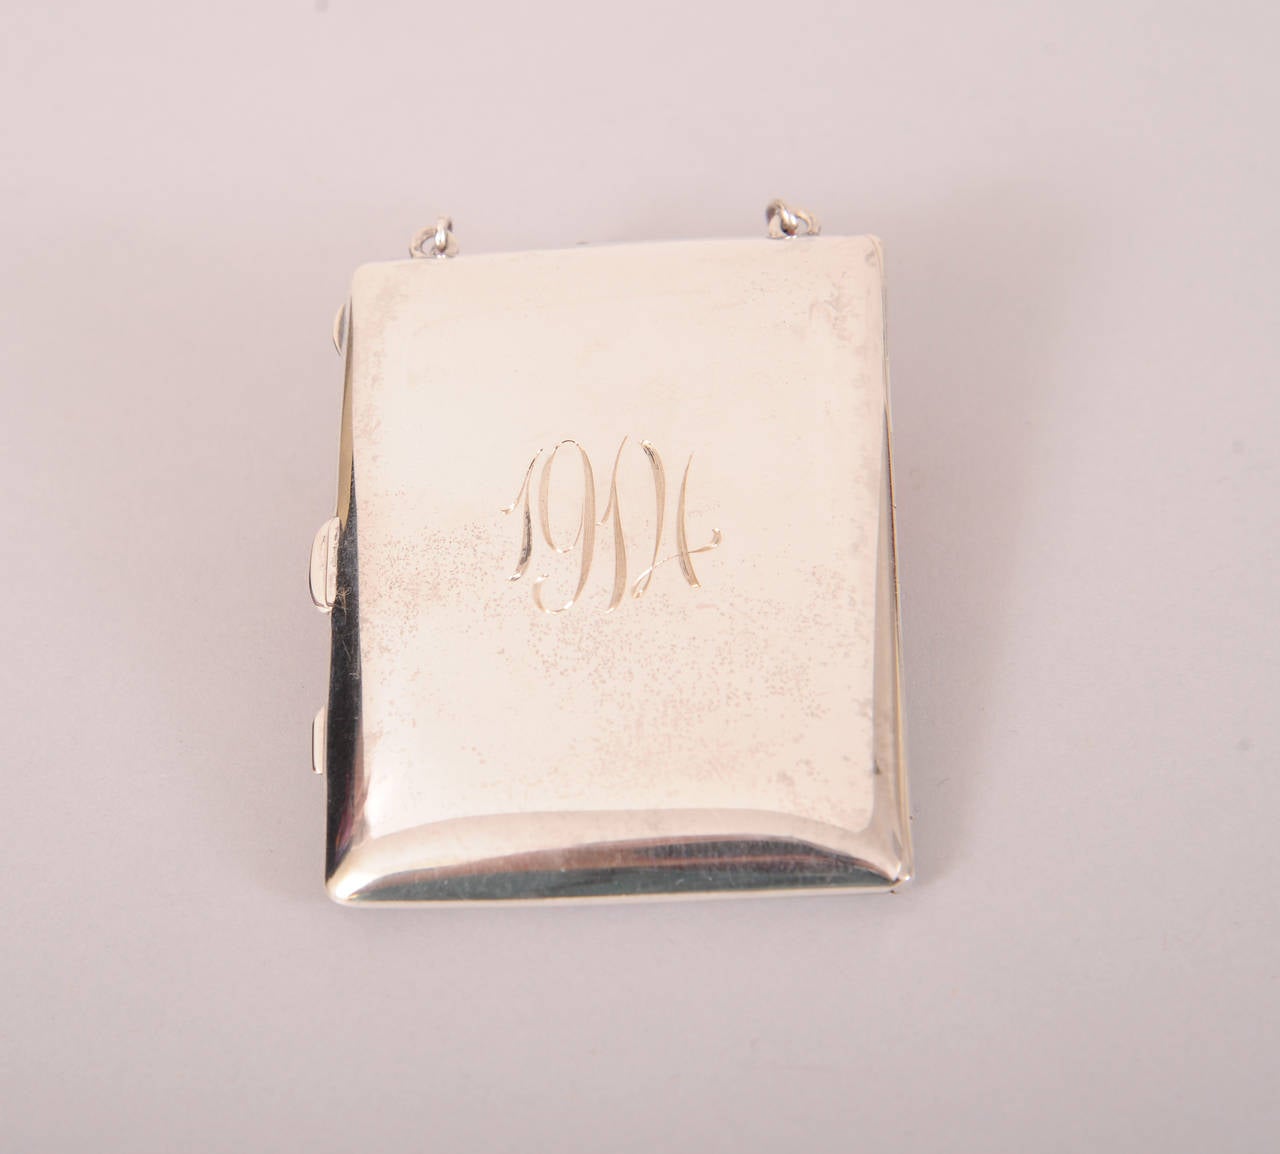 A charming Gorham & Co. sterling silver necessaire held everything a lady needed in 1914. There is a mirror and compact, a place for change and a place for folding money. It is dated 1914 on one side and monogrammed on the other.
It comes with the